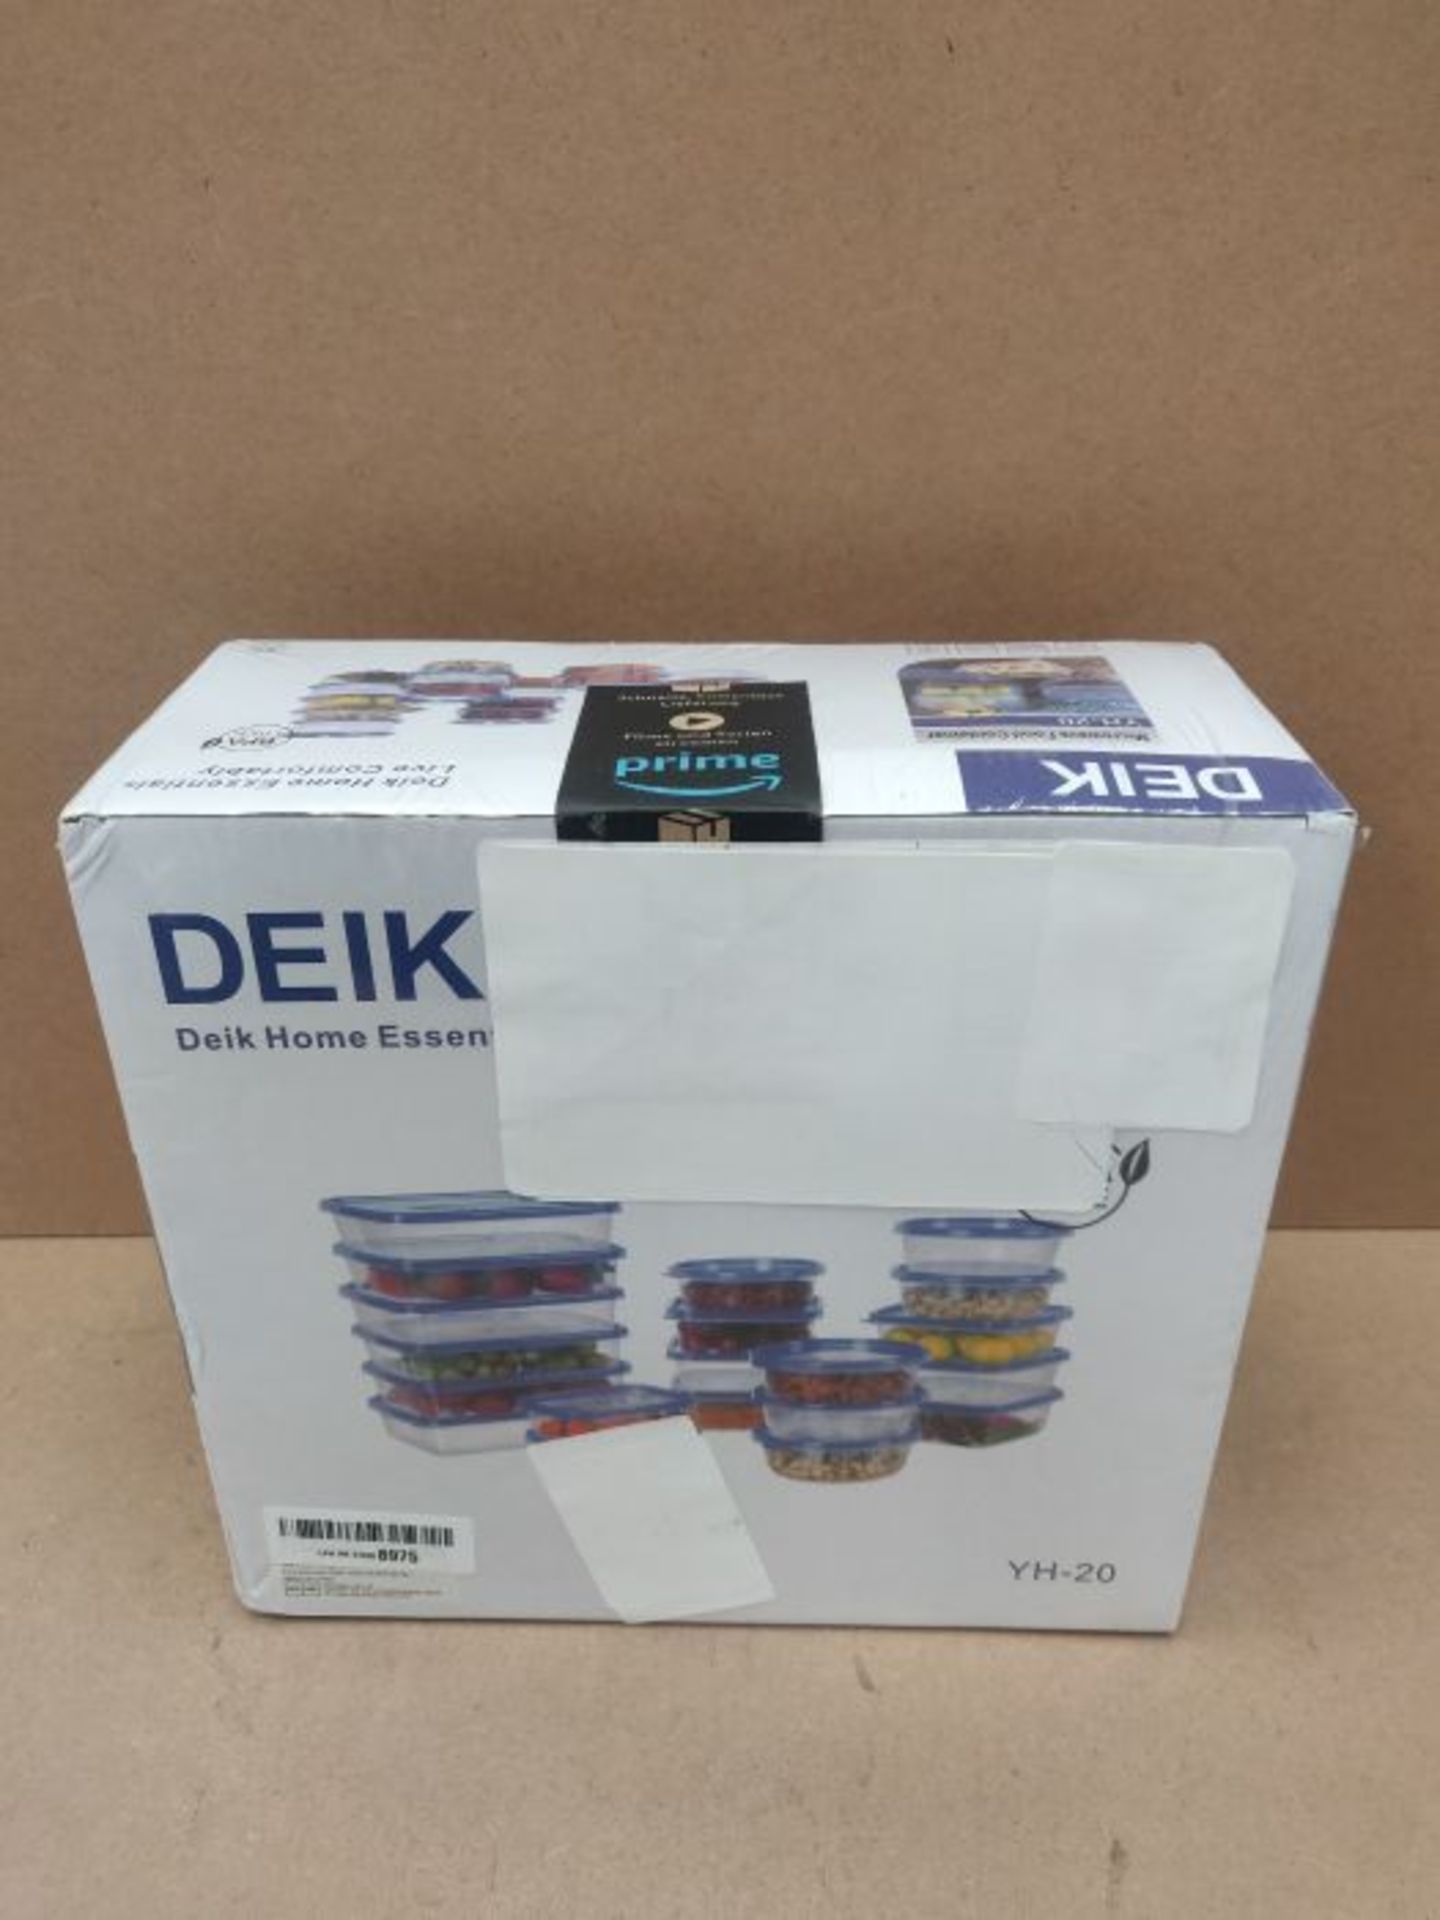 Deik Food Storage Containers 20 Packs Plastic Food Containers with Lid, Leak Resistant